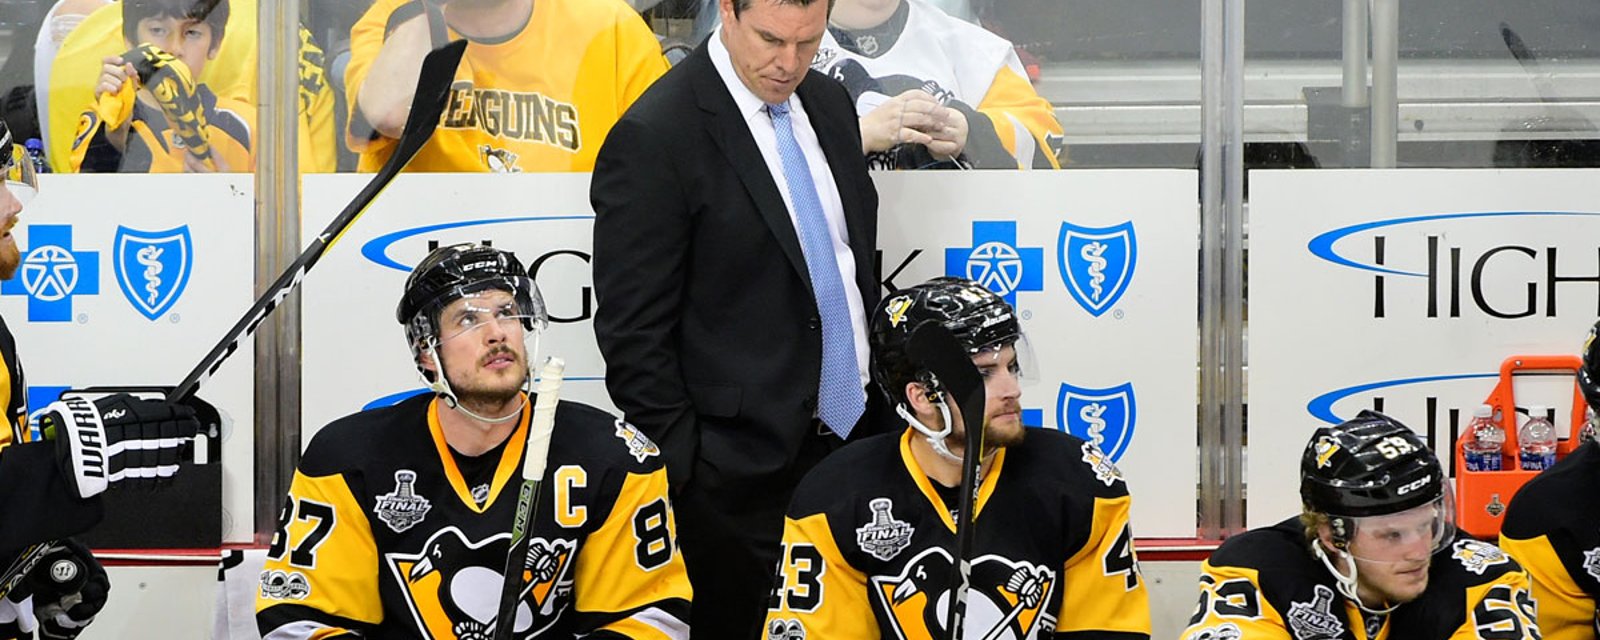 Pens call off practice following humiliating loss 